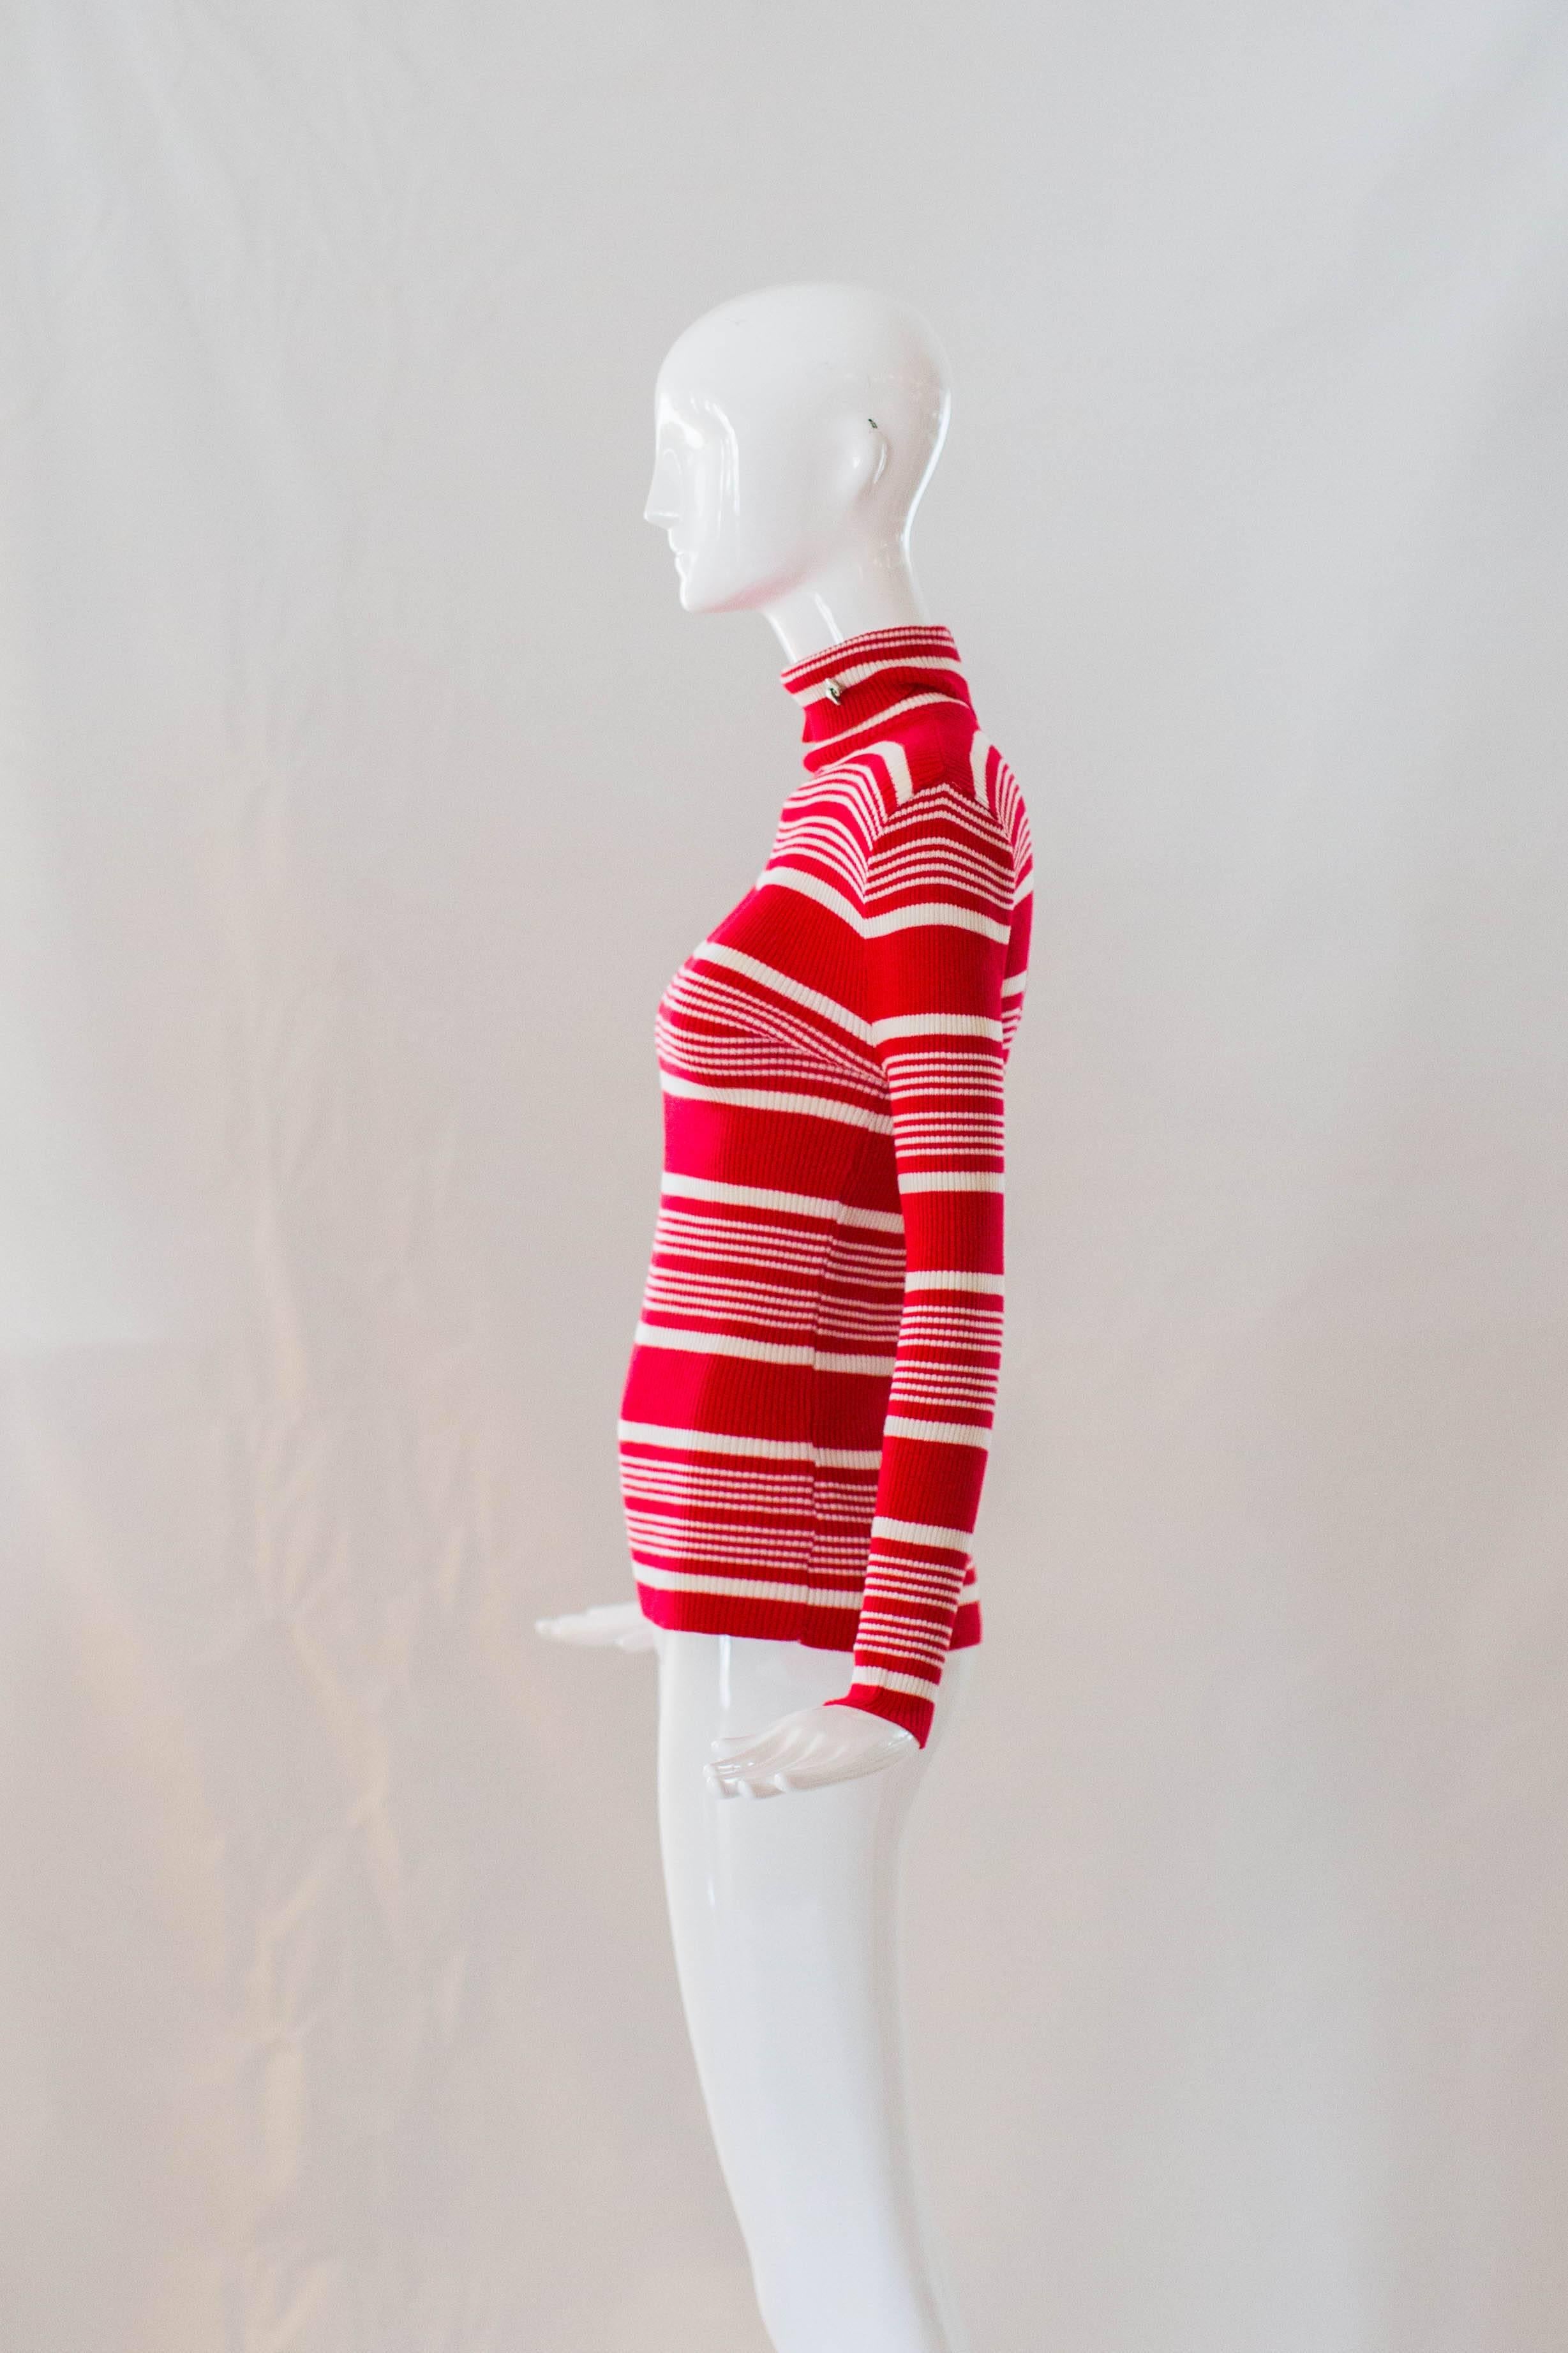 Brighten up your winter layers with a pop of color from this Pierre Cardin striped turtleneck. This comfortable ribbed knit top has long sleeves and boasts bold red and white stripes. Straight from the 1970s, this Pierre Cardin knit top is complete